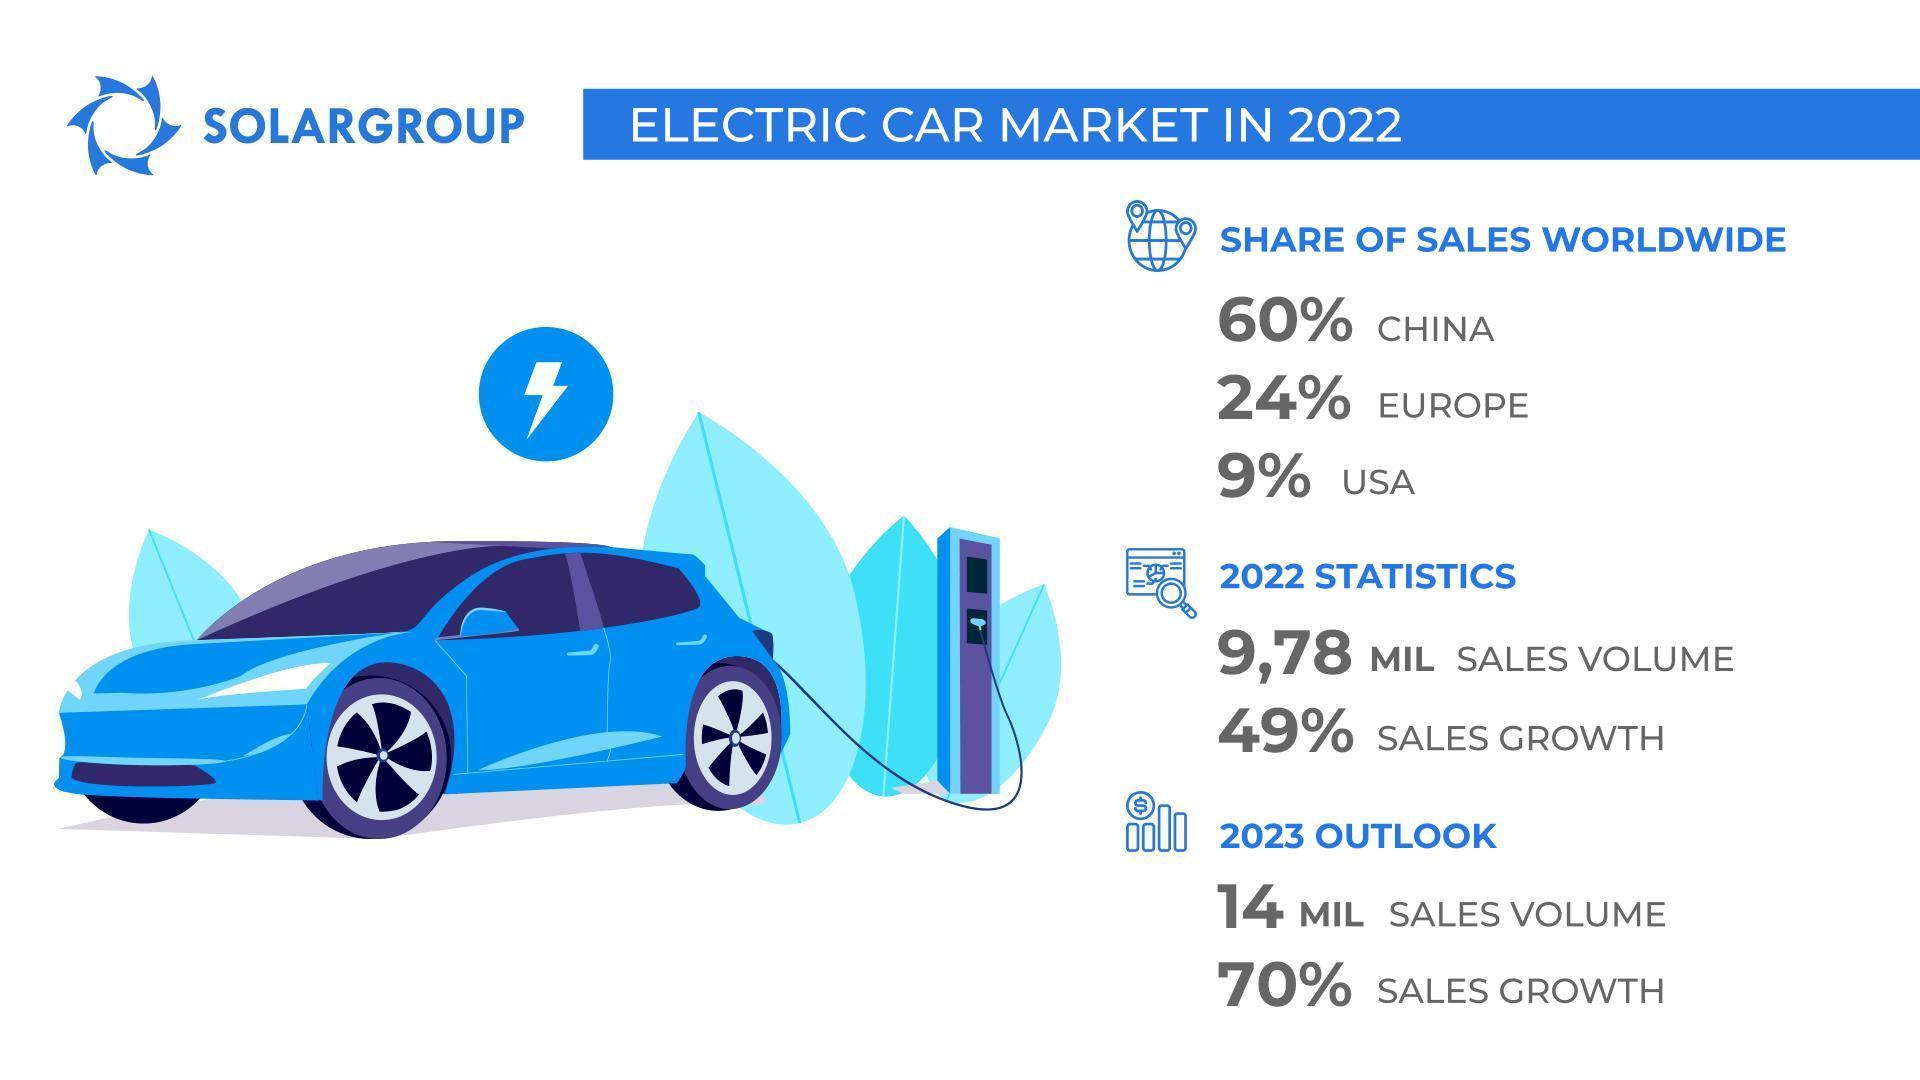 Every tenth car sold in the world is electric: the results of 2022 for the electric car market